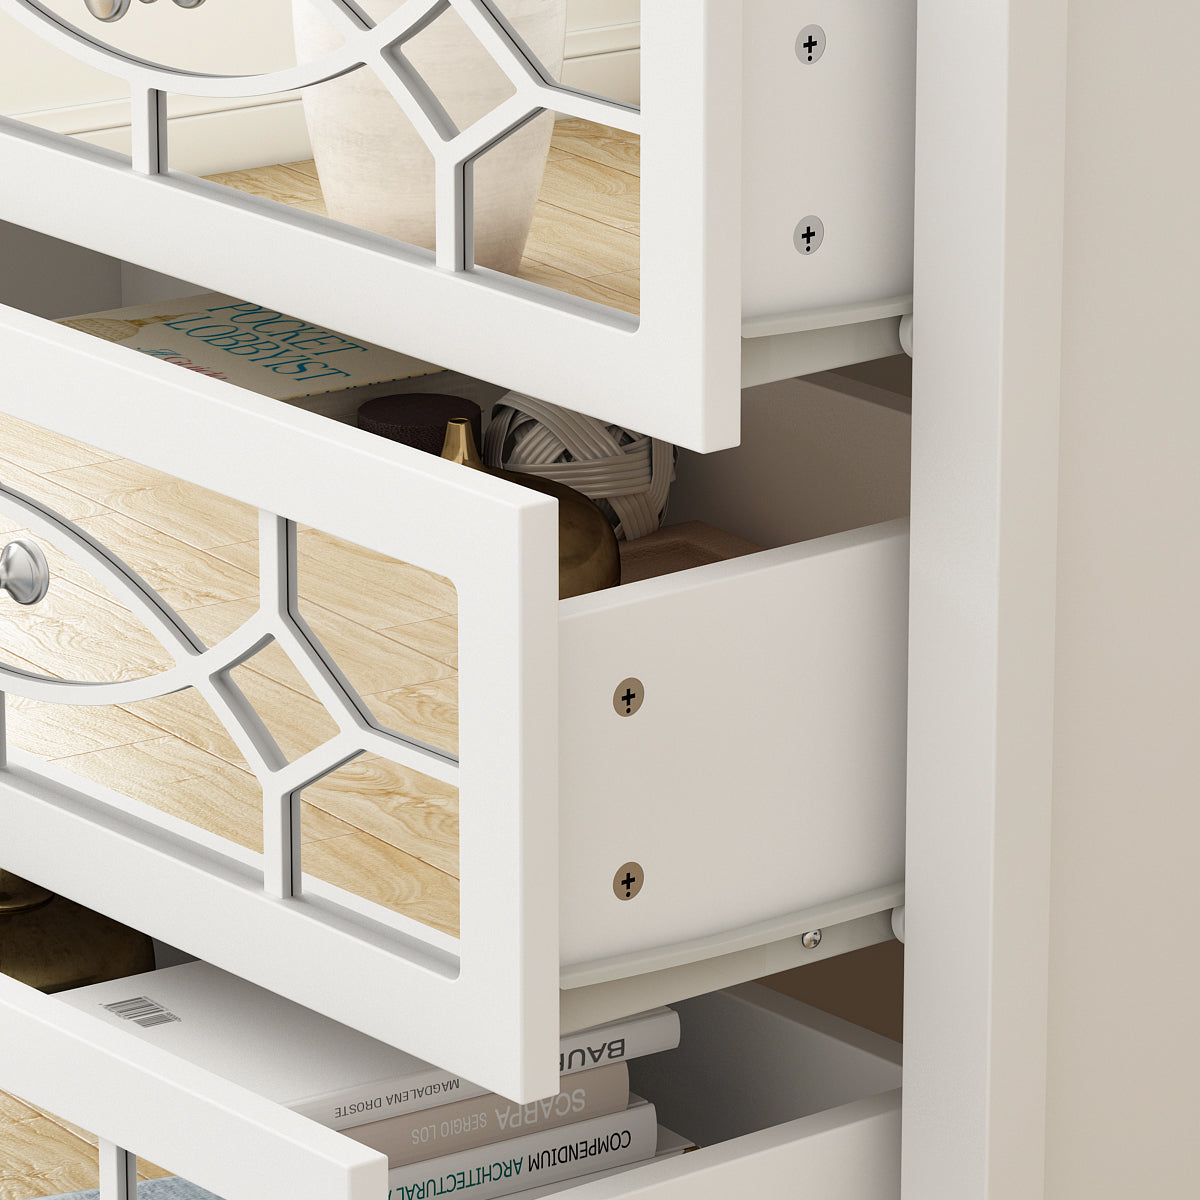 Dresser with 3 Mirrored Drawers Storage Nightstand in White